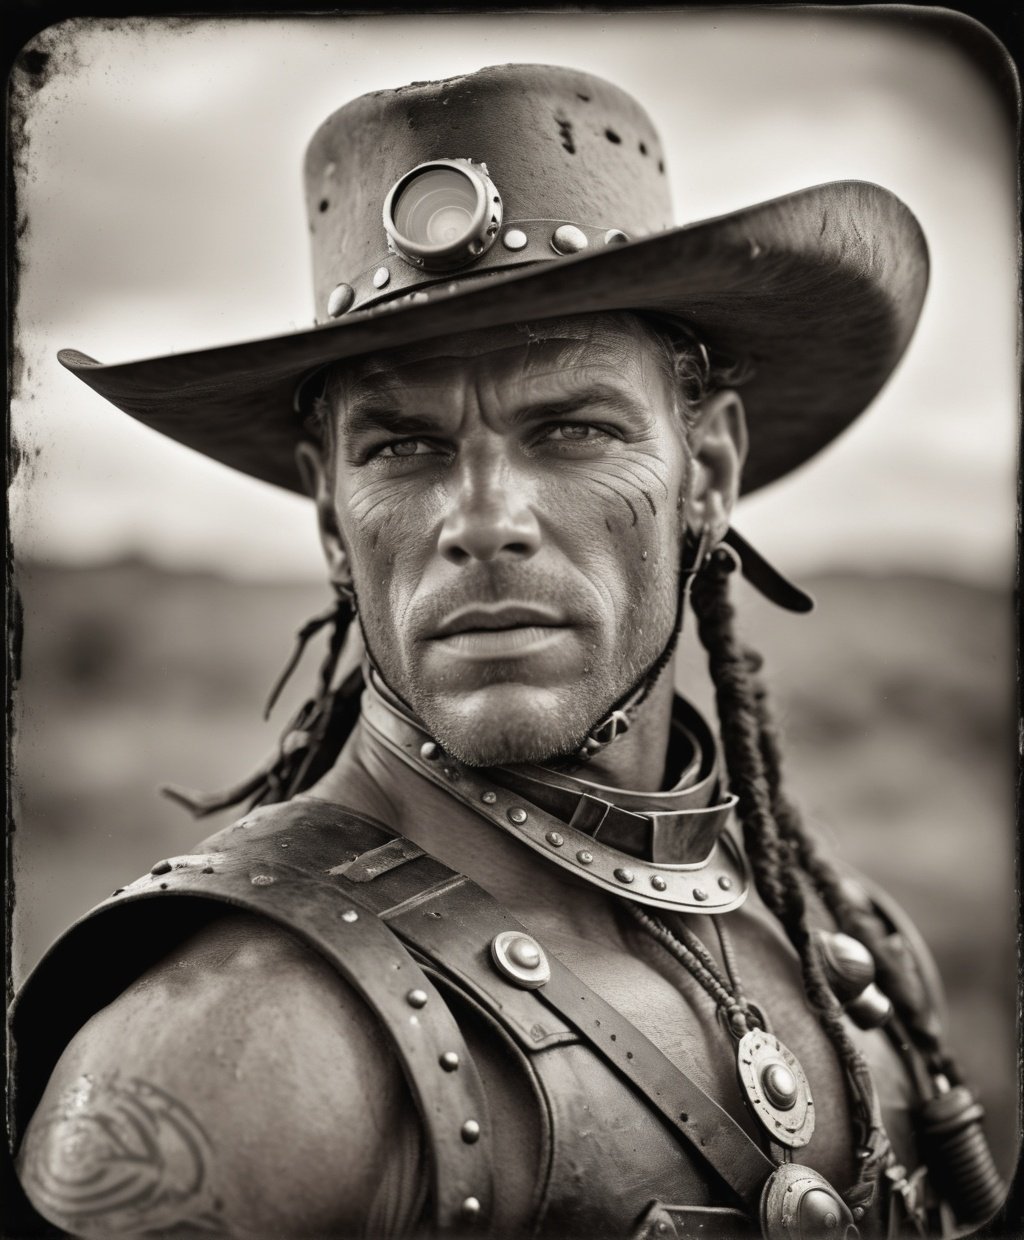 vintage wet plate photo, cyborg mutant warrior cowboy in world war 5 from 3055 after a huge battle. Nikon 100mm 100iso f8.0 apature, ultra-realistic, ultra detailed,